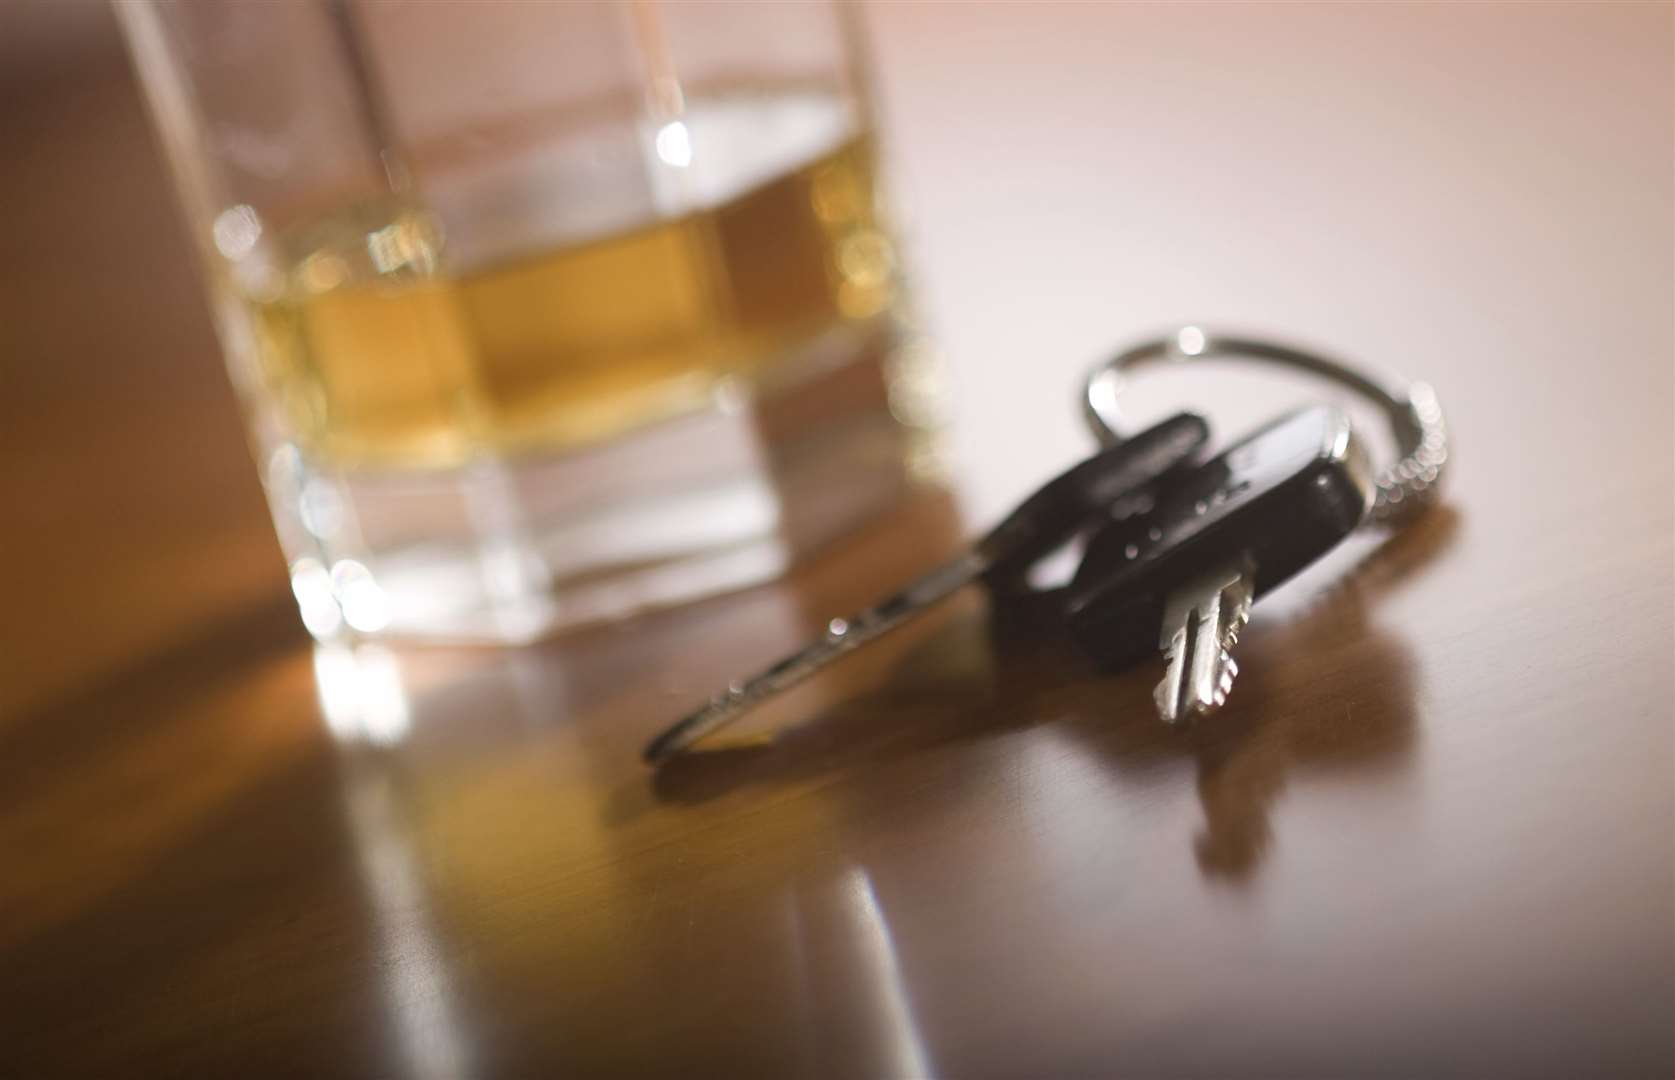 Don't drink and drive. Picture: iStock